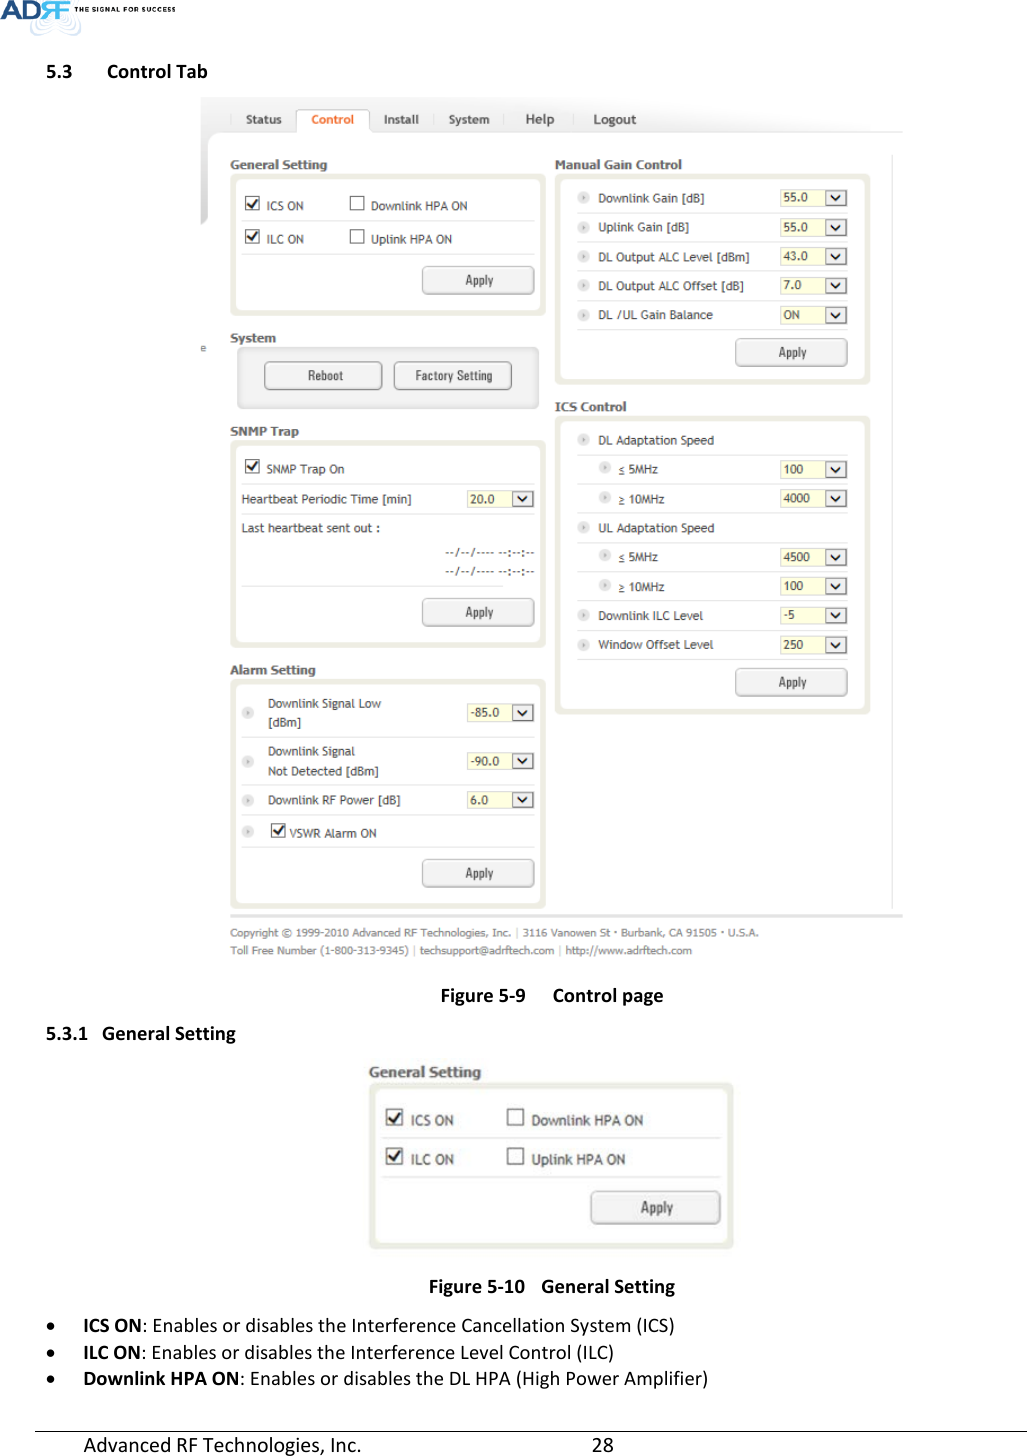  5.3  Control Tab  Figure 5-9  Control page 5.3.1 General Setting  Figure 5-10 General Setting • ICS ON: Enables or disables the Interference Cancellation System (ICS) • ILC ON: Enables or disables the Interference Level Control (ILC) • Downlink HPA ON: Enables or disables the DL HPA (High Power Amplifier) Advanced RF Technologies, Inc.       28    